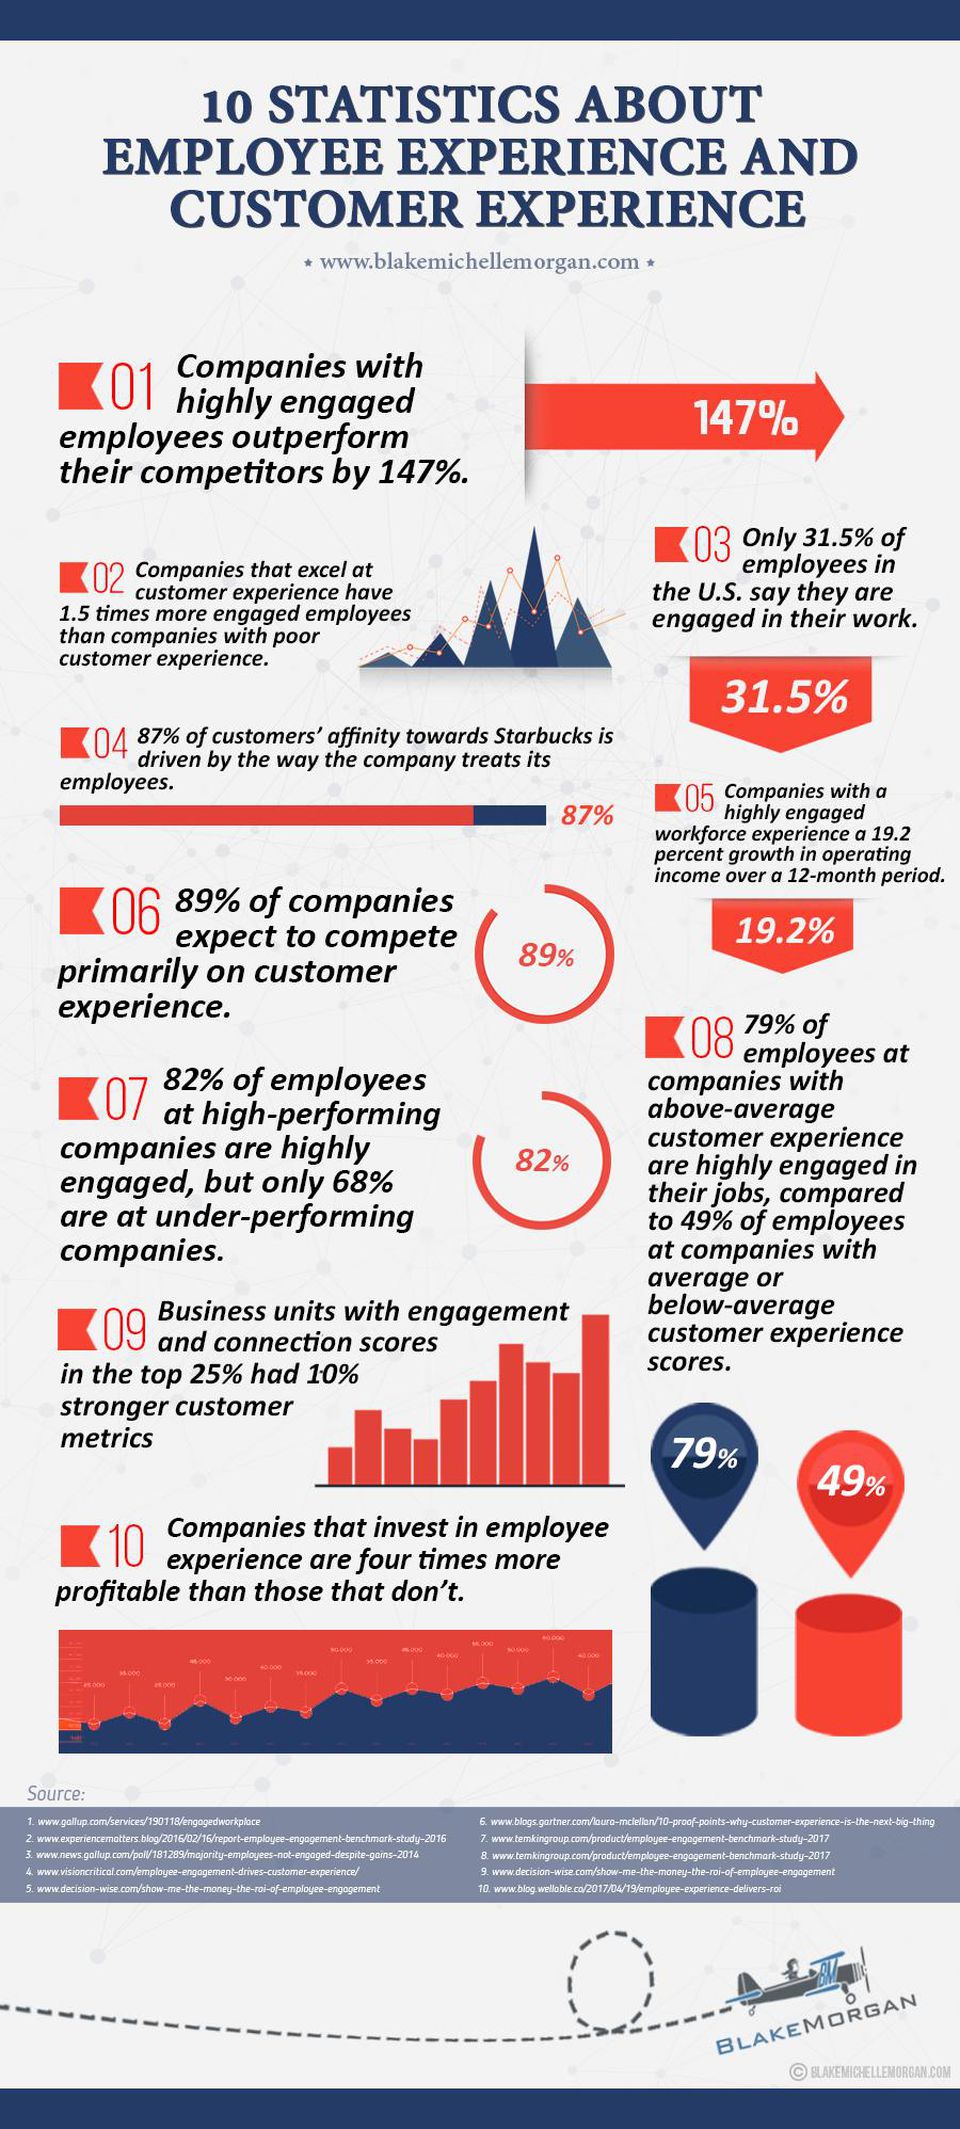 10 Statistics About Employee Experience And Customer Experience